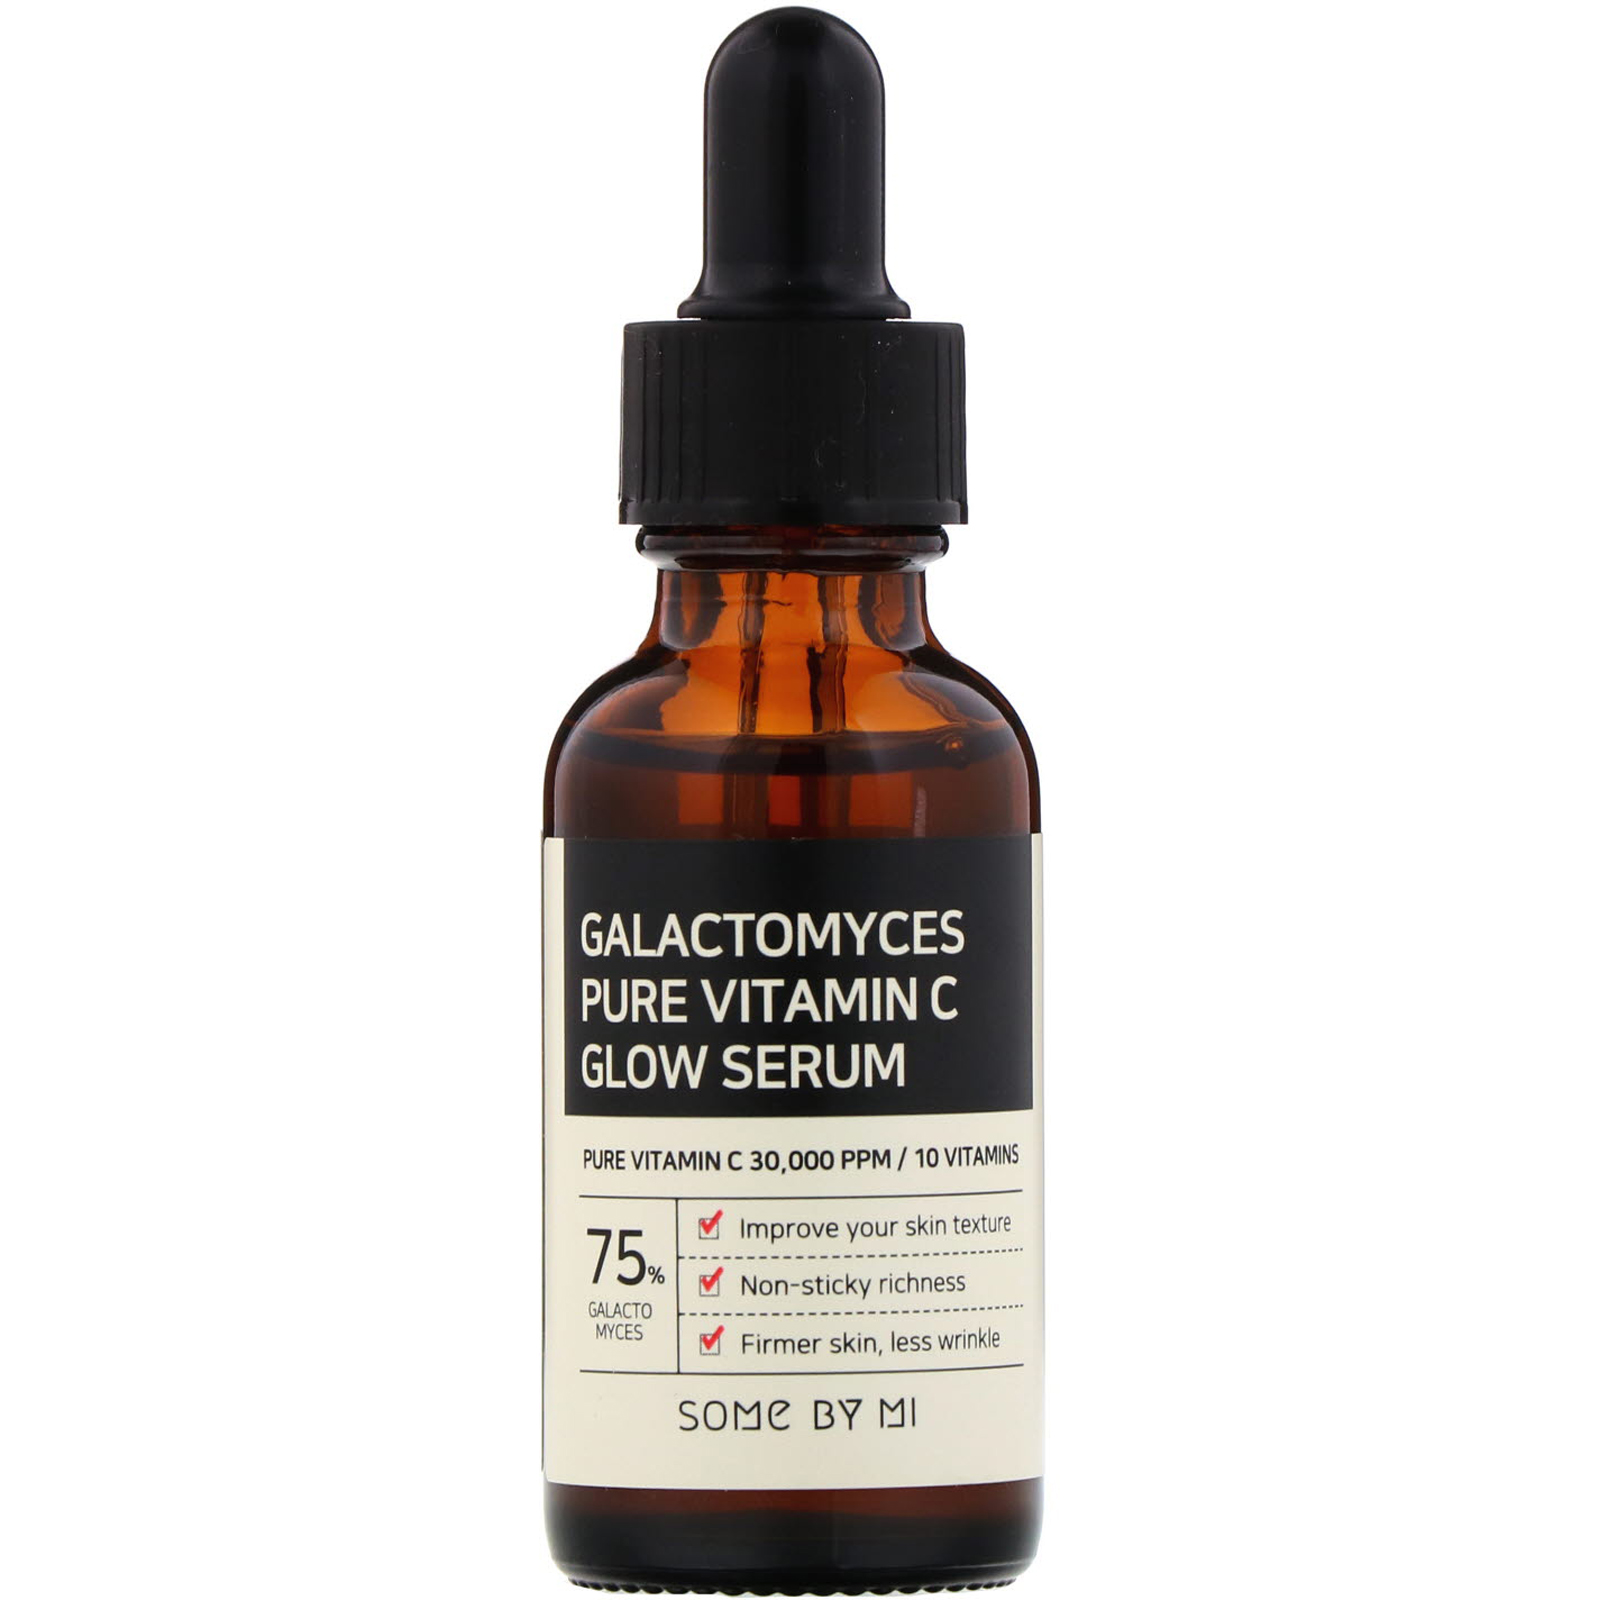 some by mi galactomyces pure vitamin c glow serum - Online Discount Shop  for Electronics, Apparel, Toys, Books, Games, Computers, Shoes, Jewelry,  Watches, Baby Products, Sports & Outdoors, Office Products, Bed &